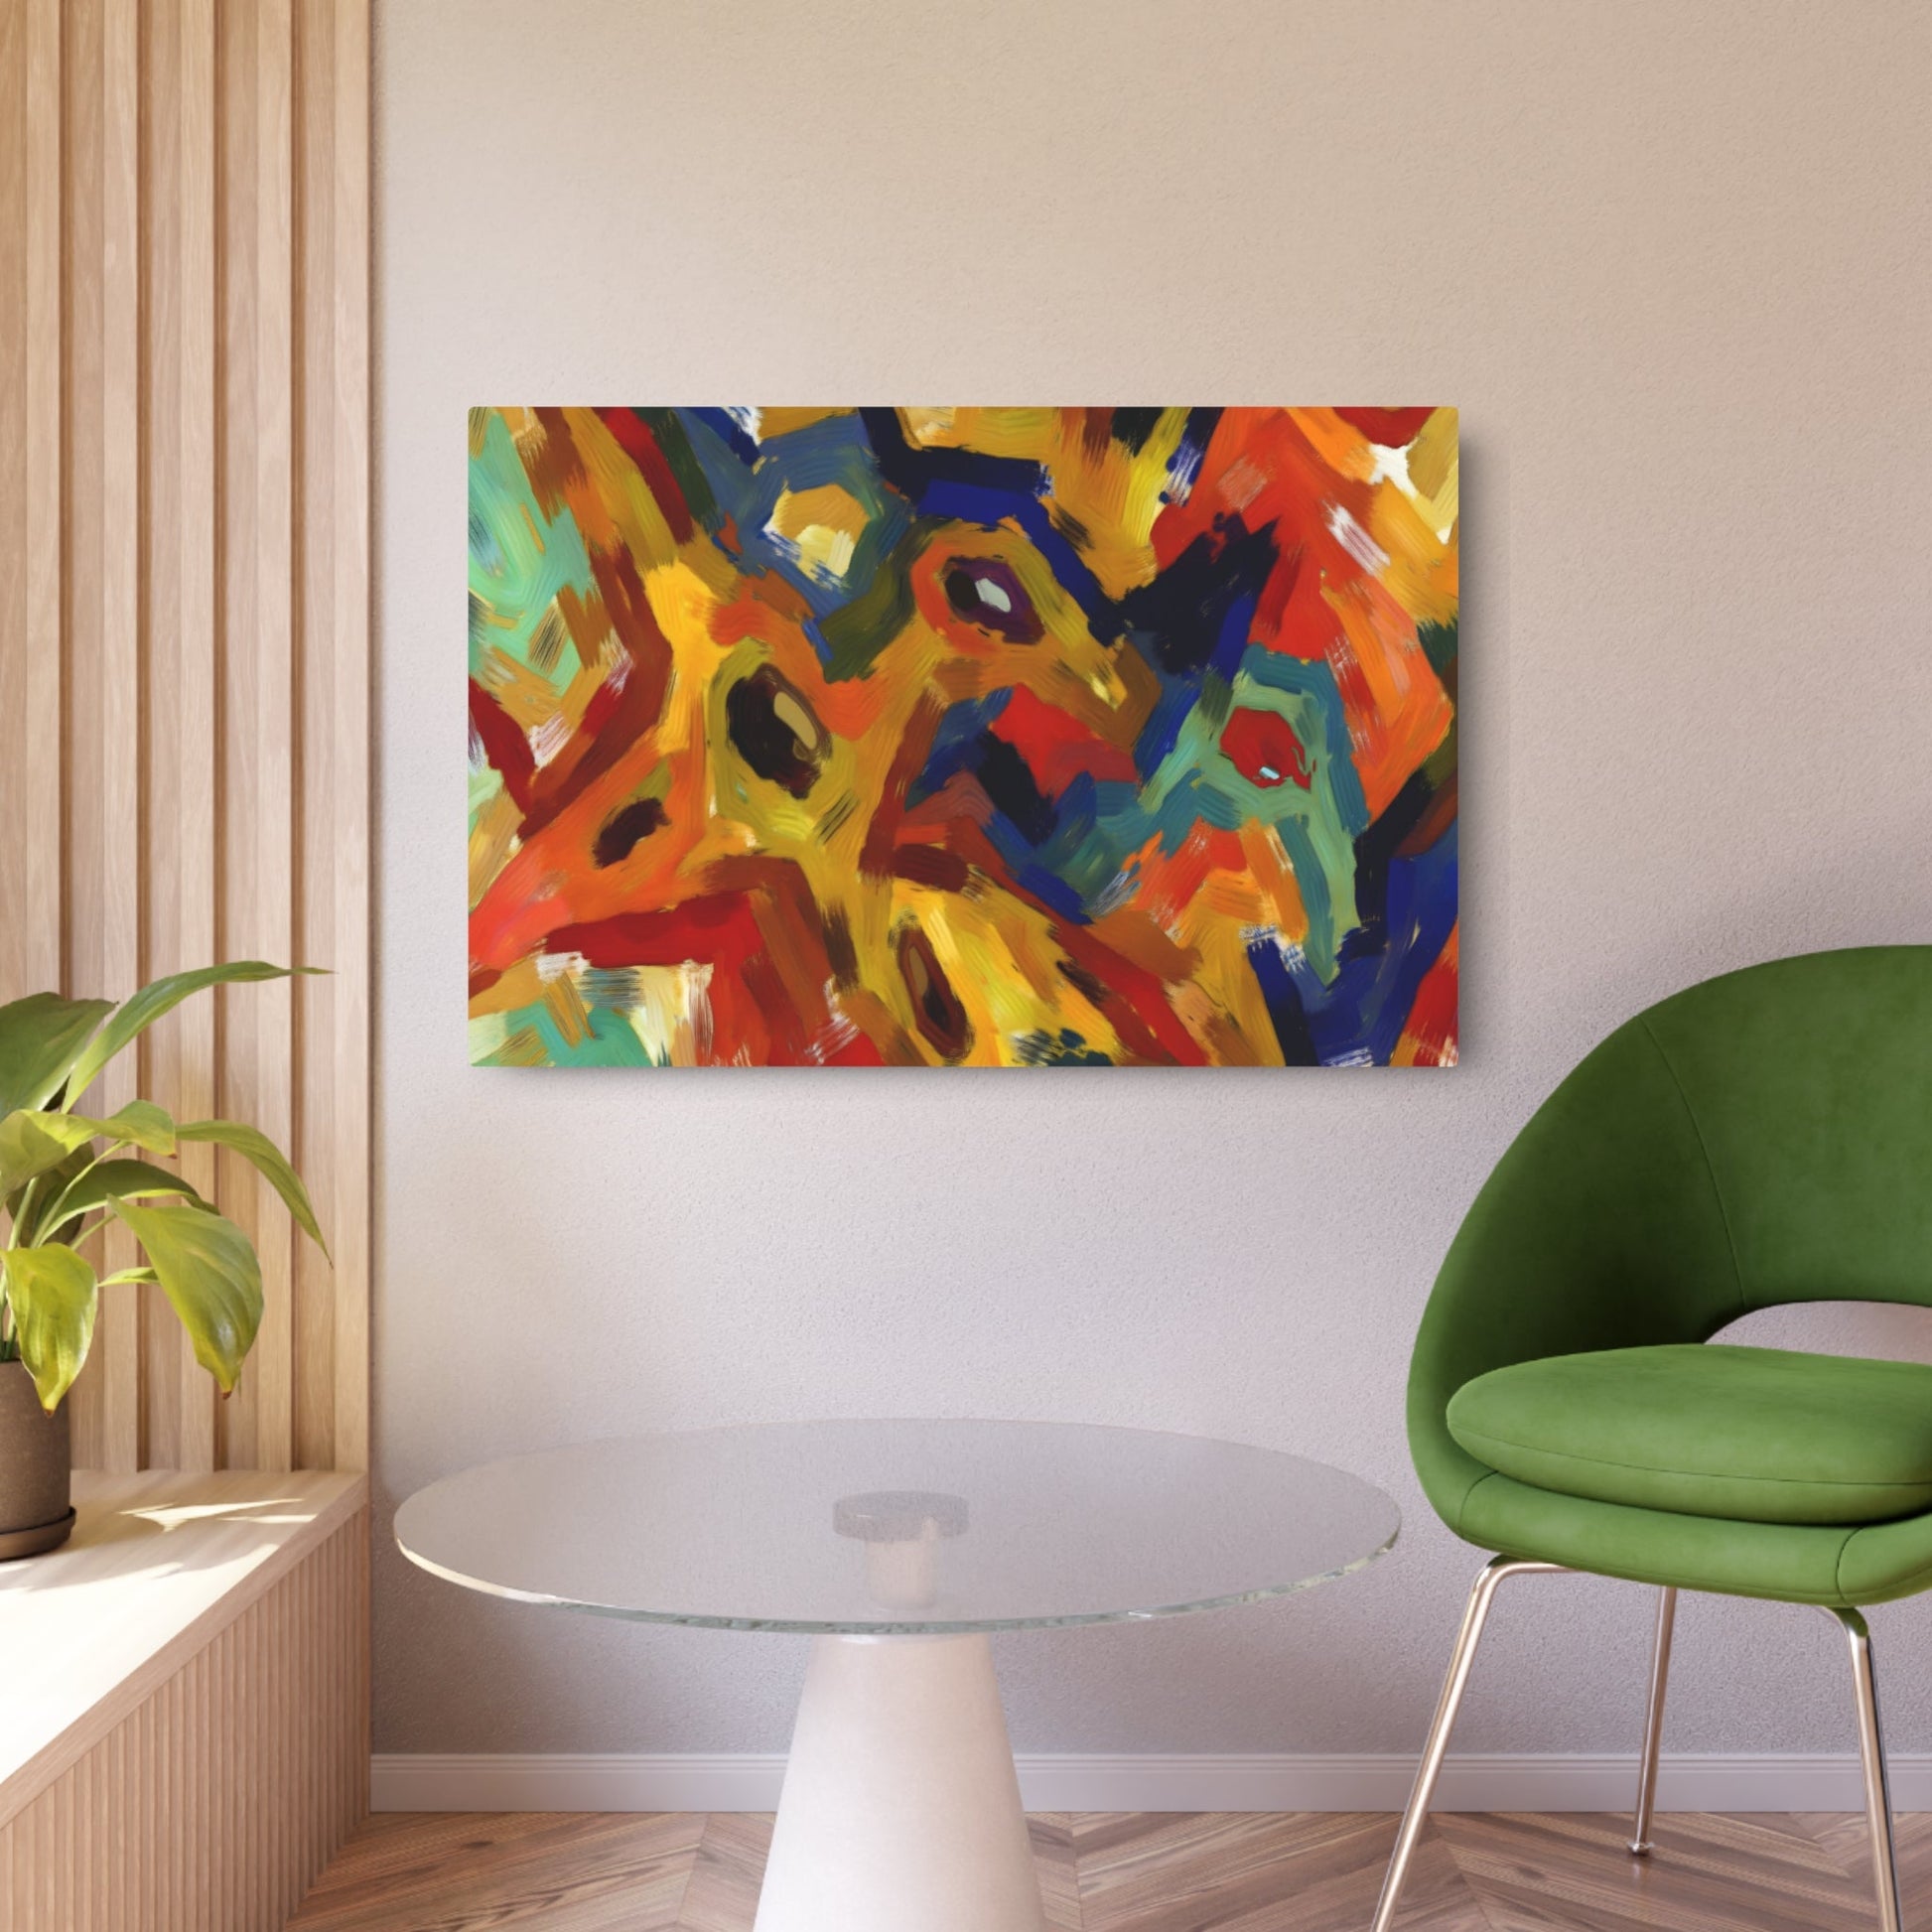 Metal Poster Art | "Vibrant Expressionist Style Western Artwork: Bold Colors, Distorted Forms and Dramatic Brushstrokes with High Emotional Impact" - Metal Poster Art 36″ x 24″ (Horizontal) 0.12''